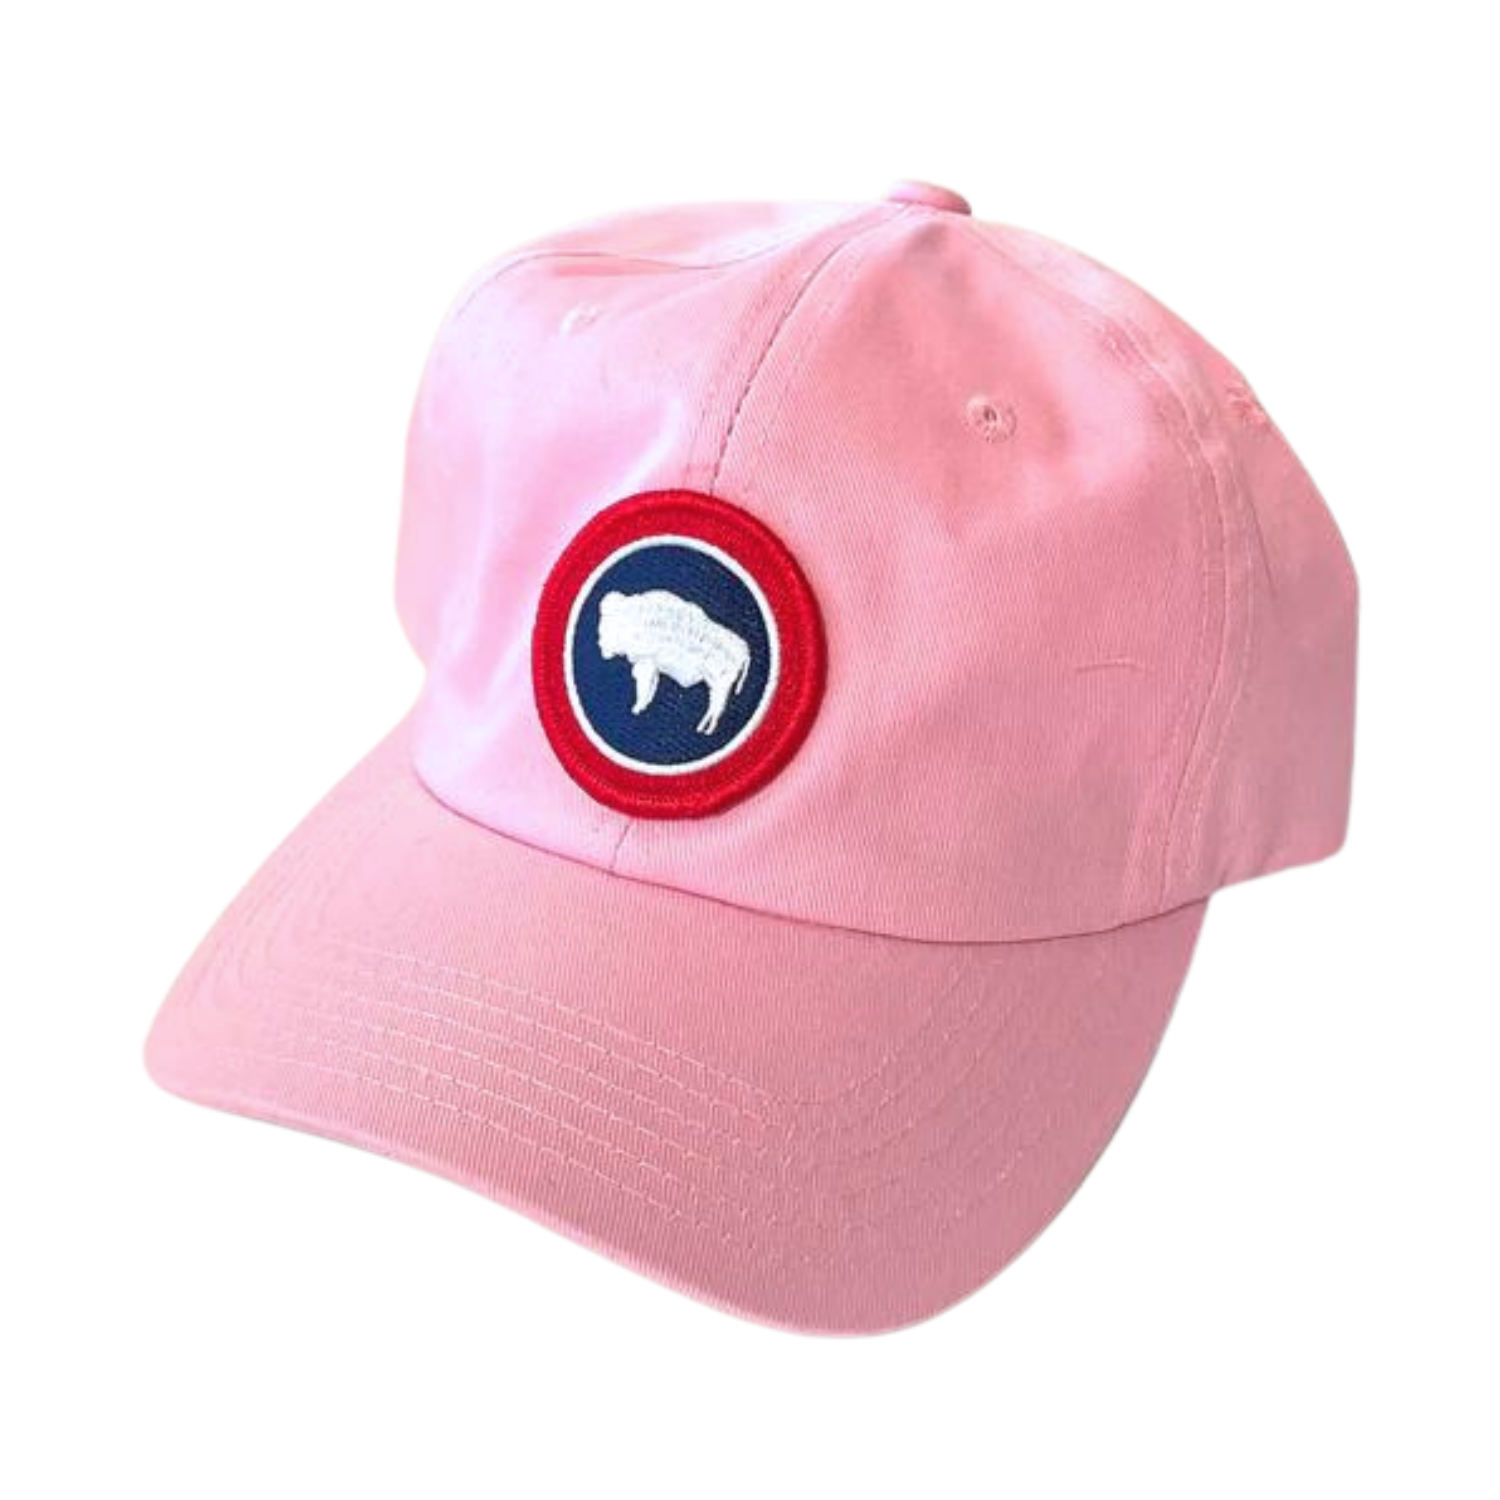 Pink Wyoming Patch Hat 